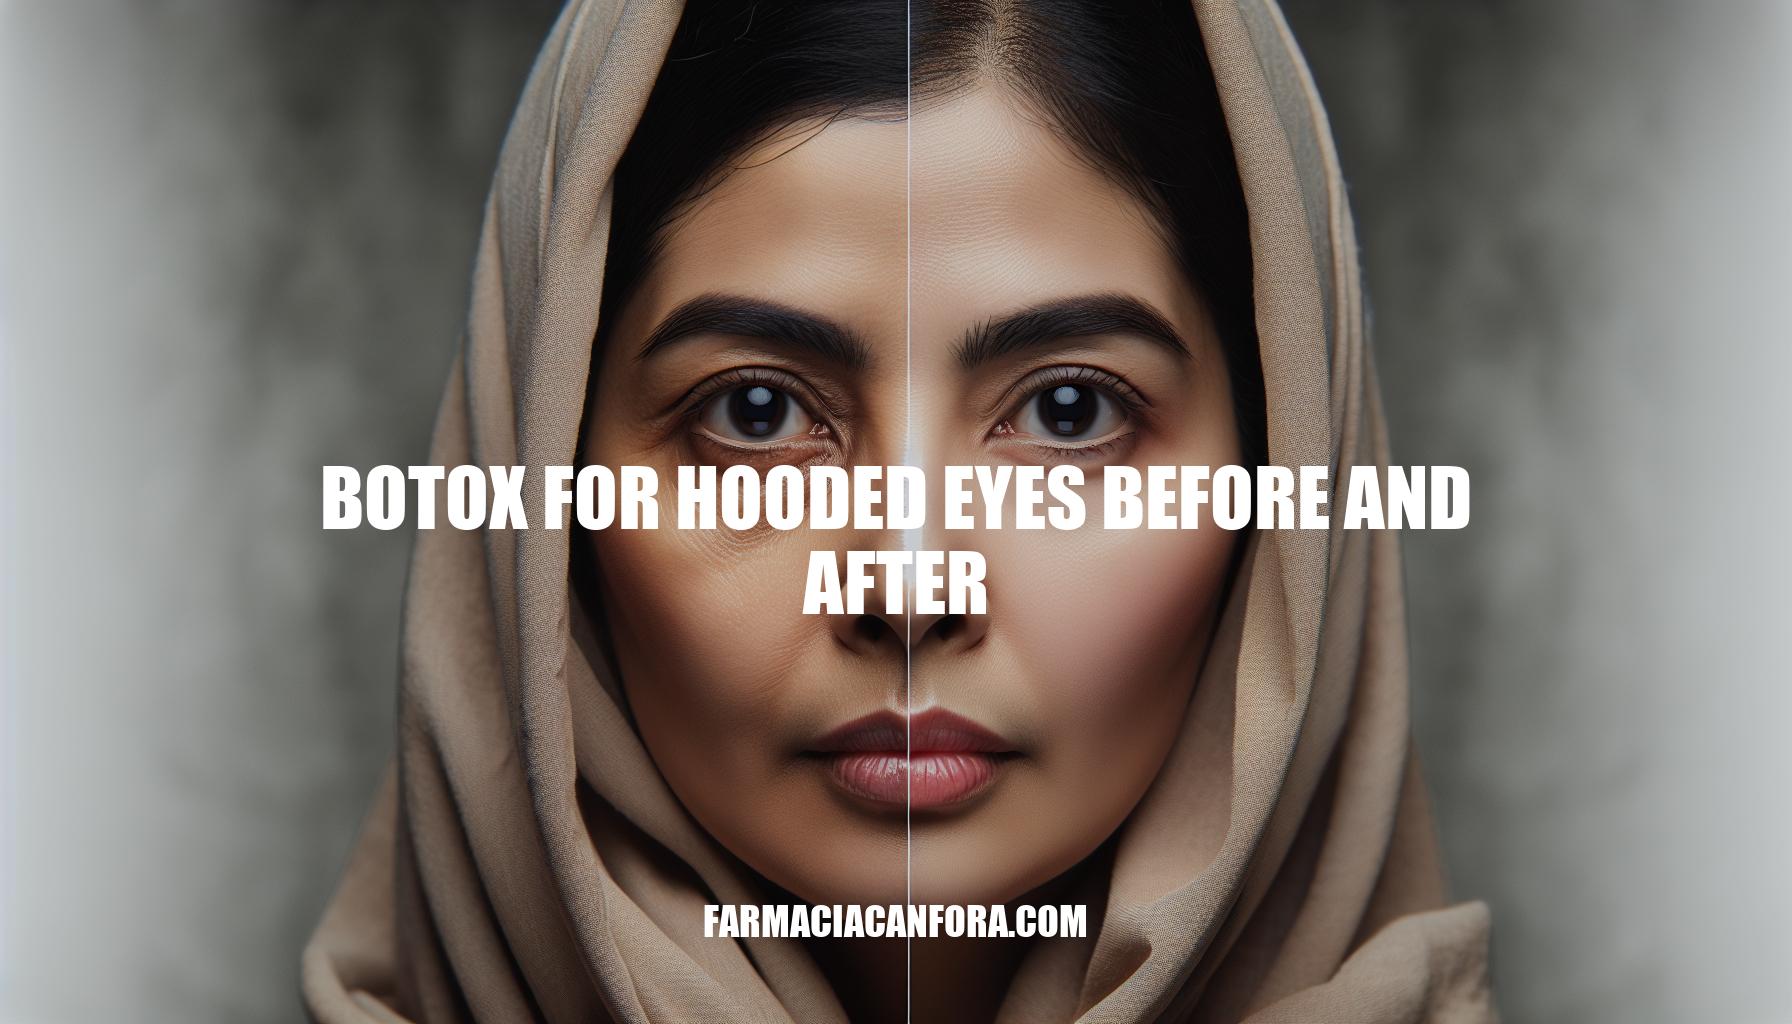 Botox for Hooded Eyes Before and After Guide